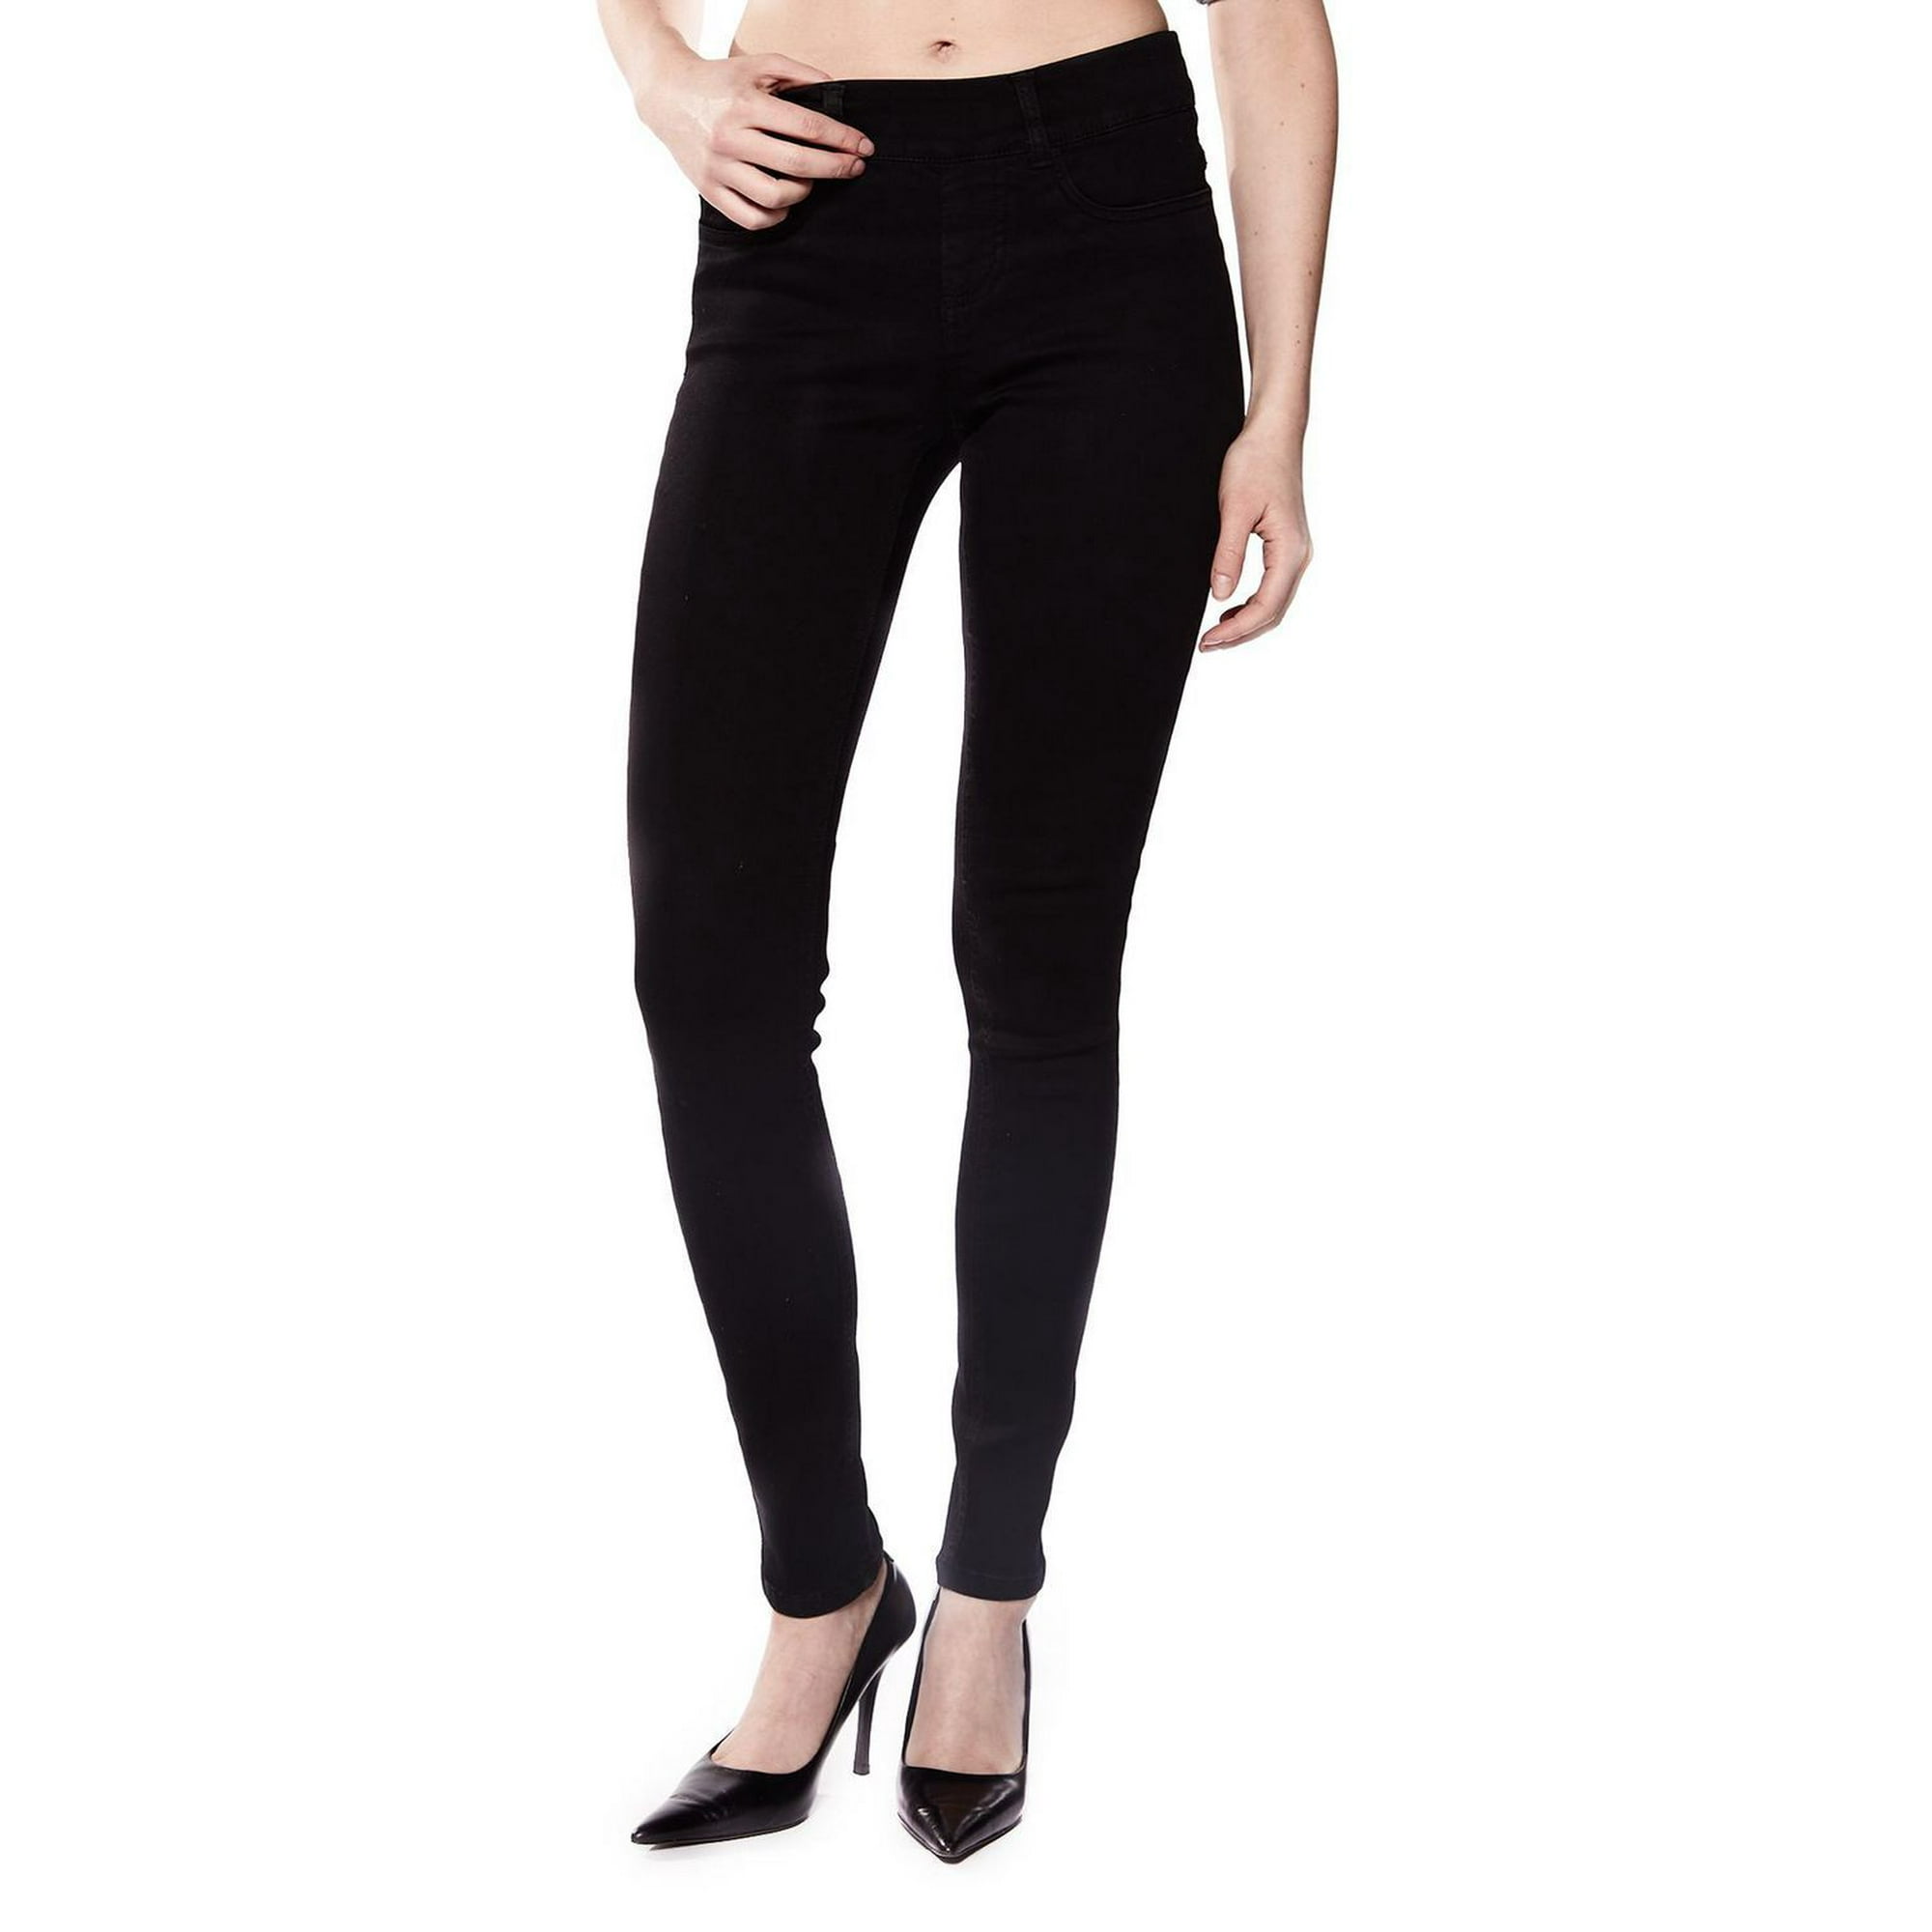 Stylish & Hot black jeggings at Affordable Prices 